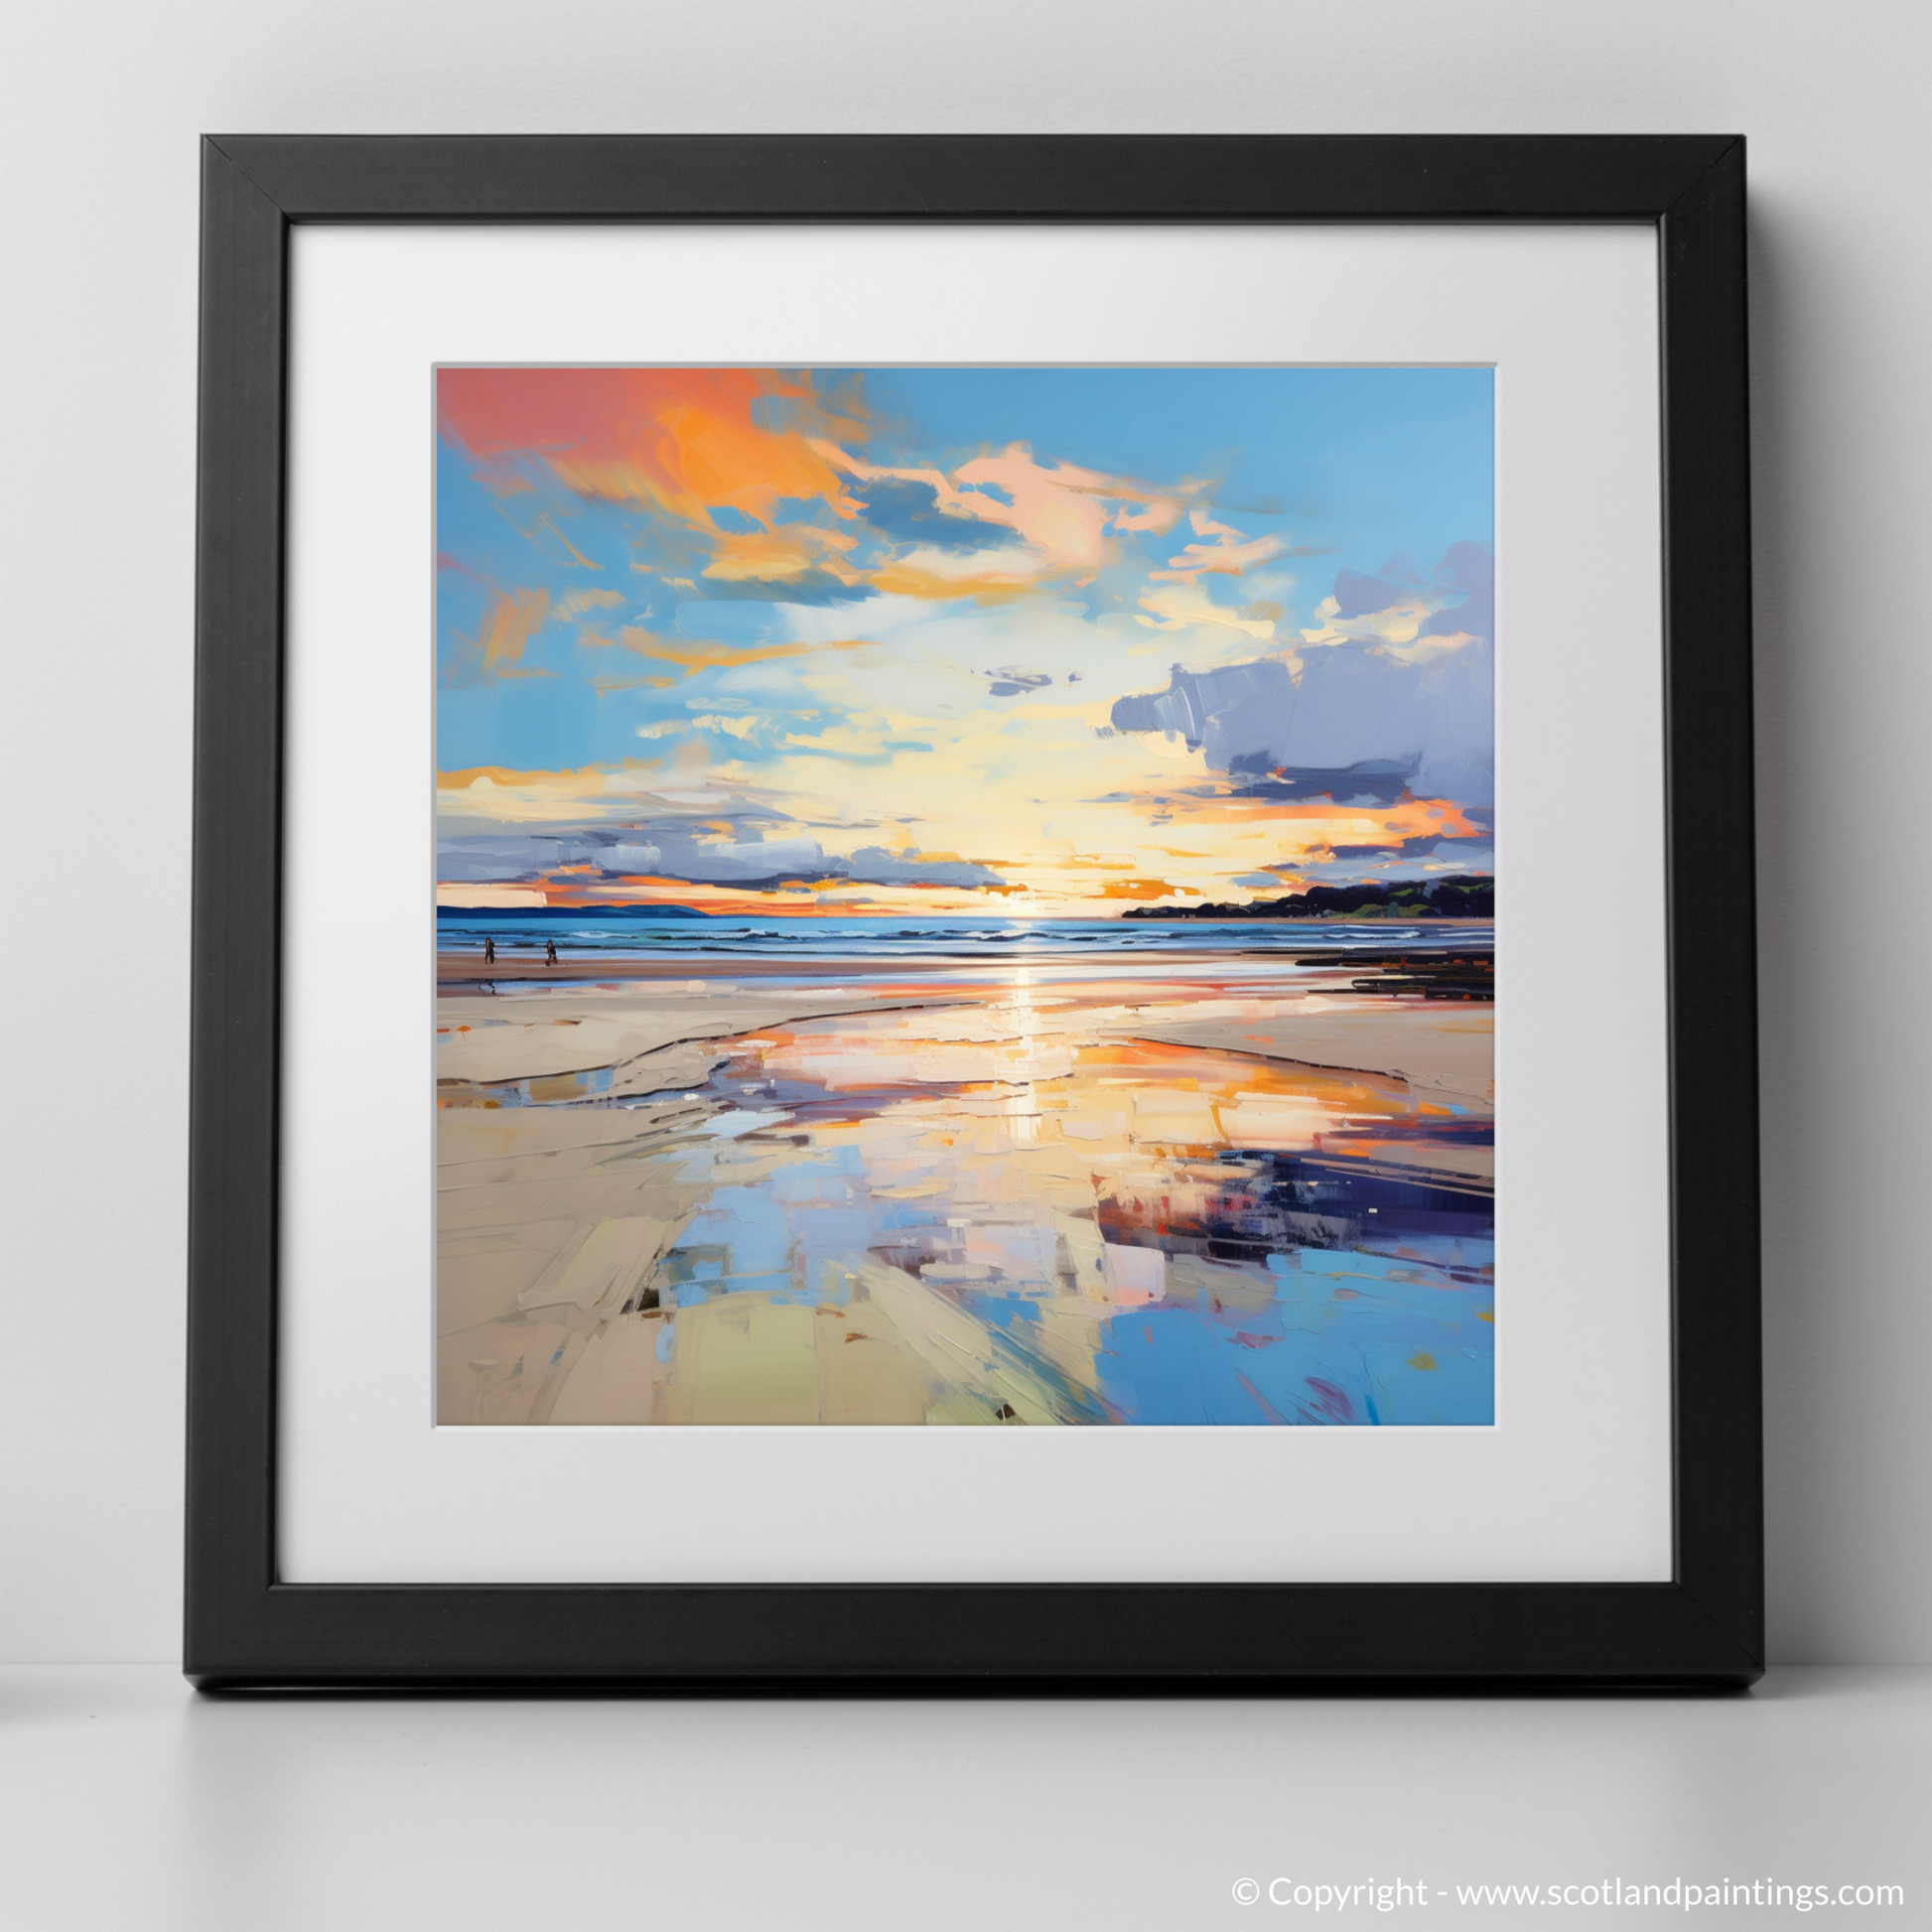 Art Print of Nairn Beach at golden hour with a black frame